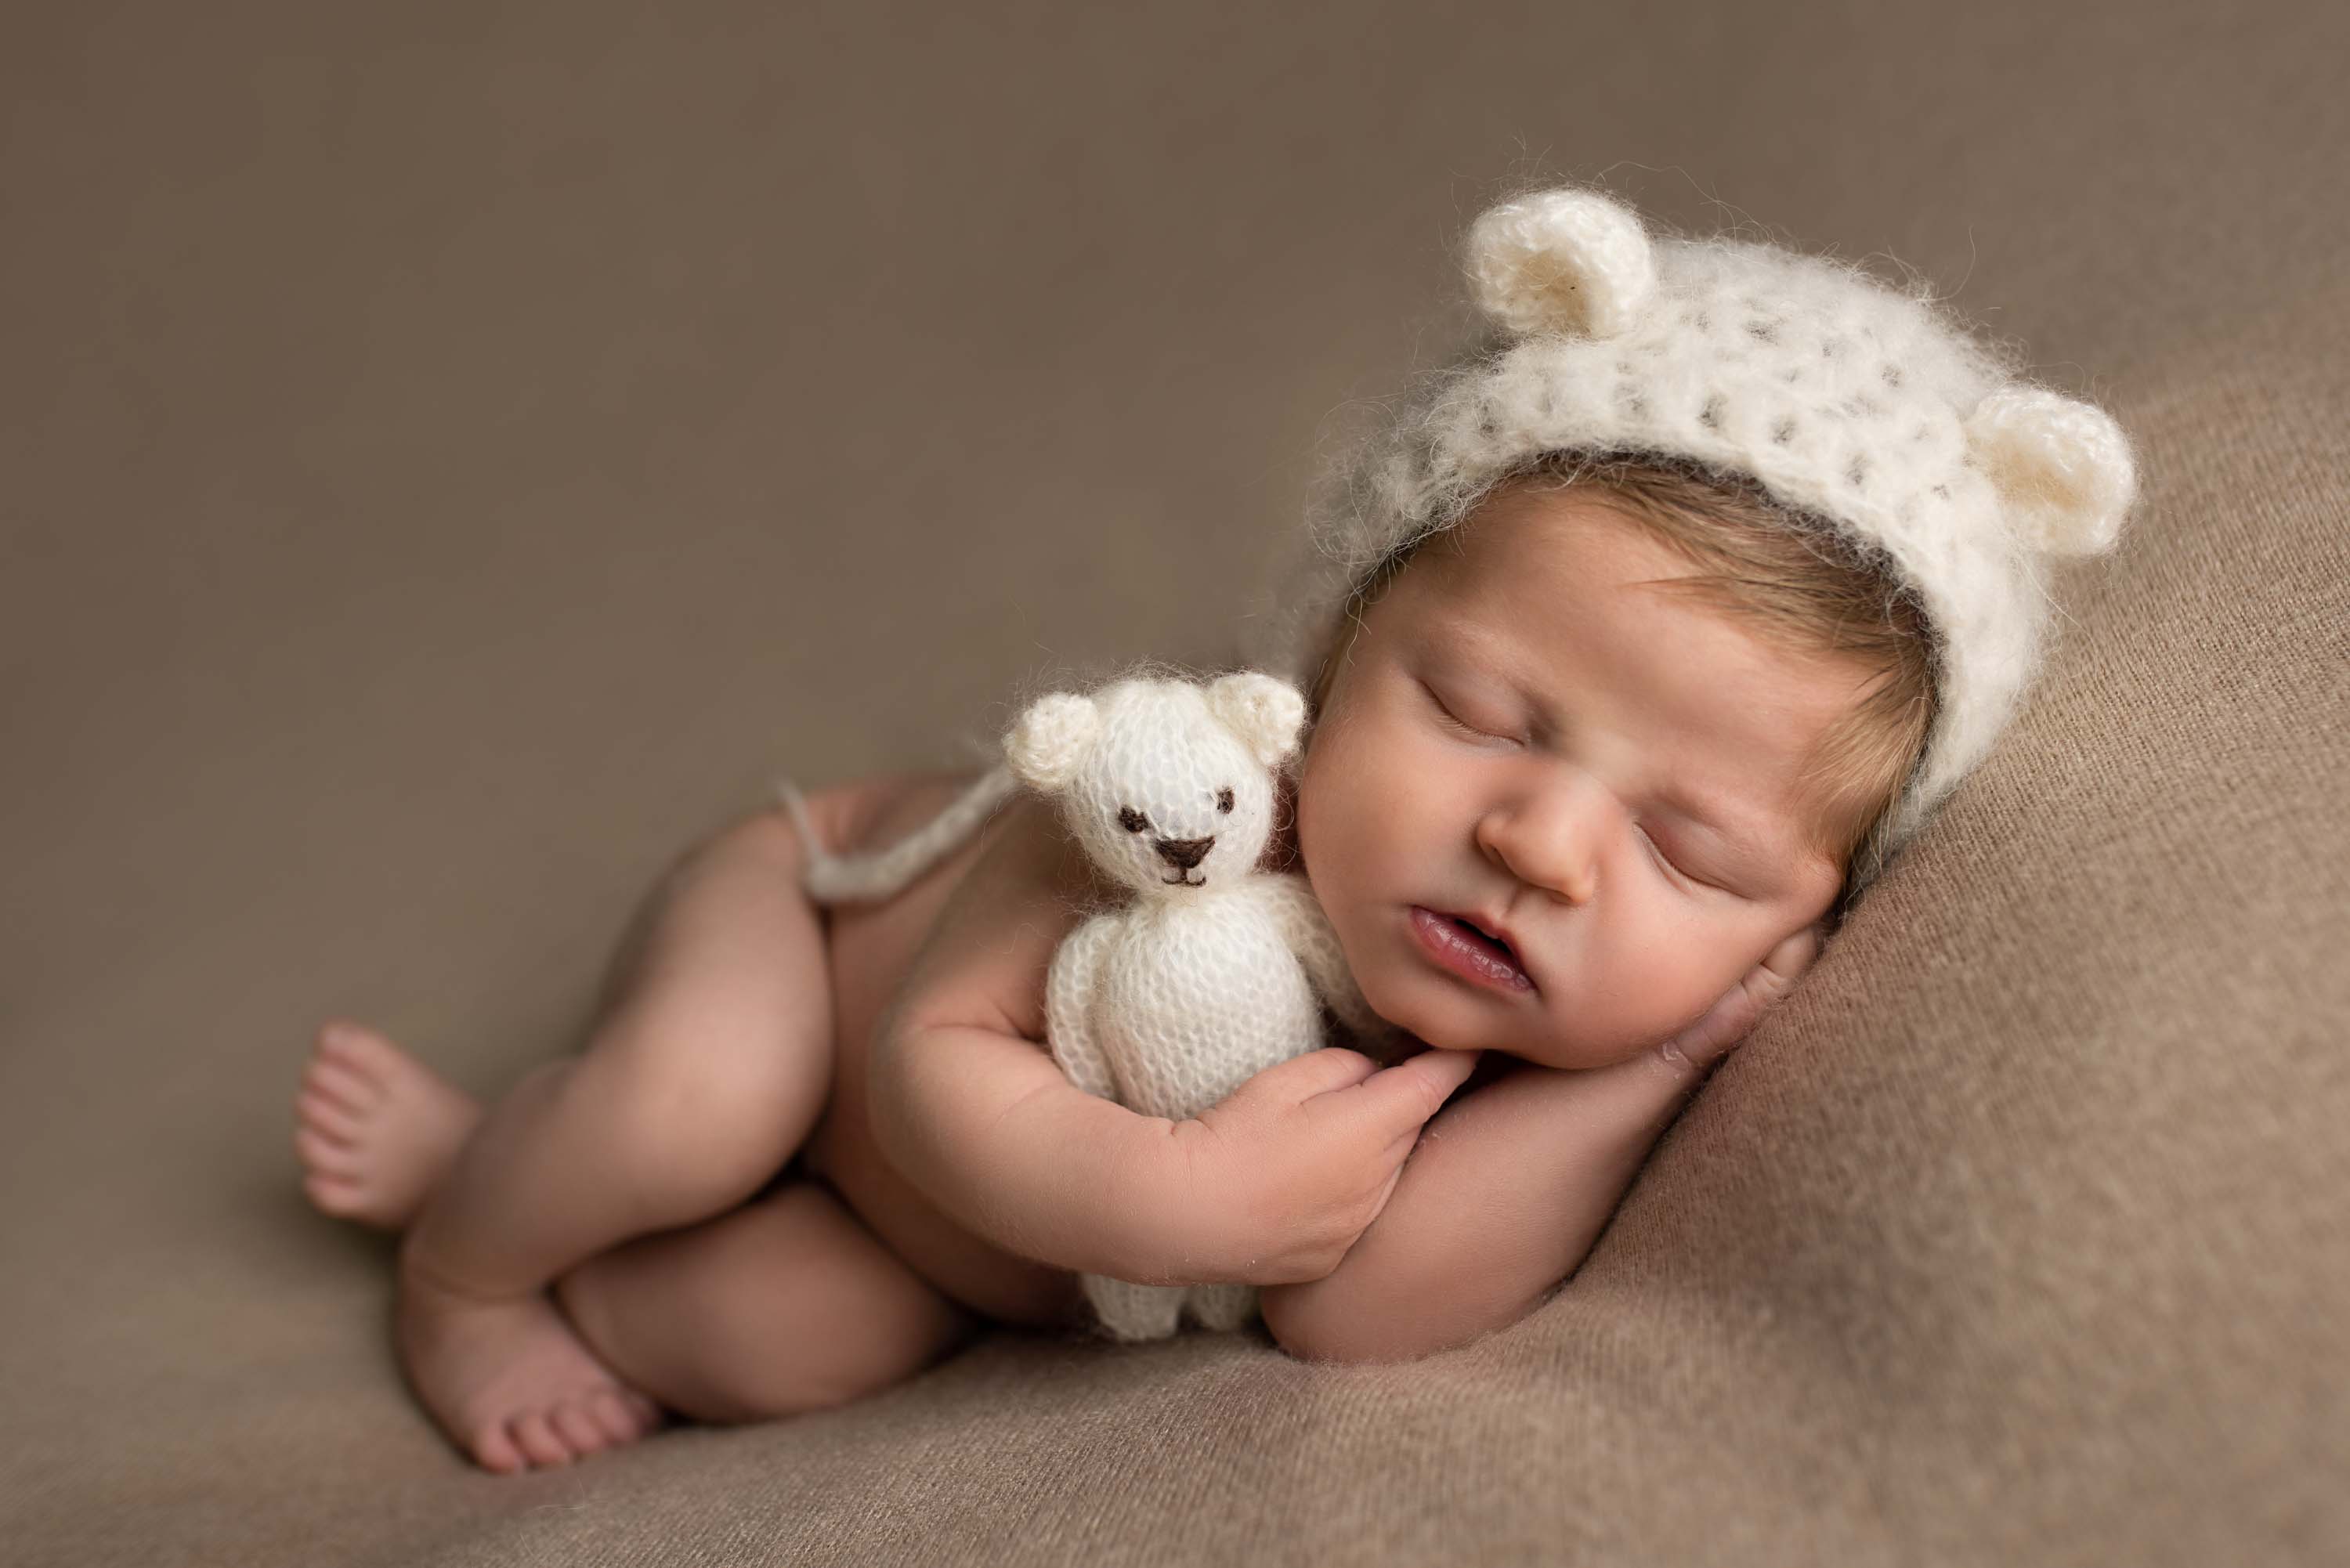 Baby boy in side pose wearing knitted bear hat and cuddling a little teddy bear